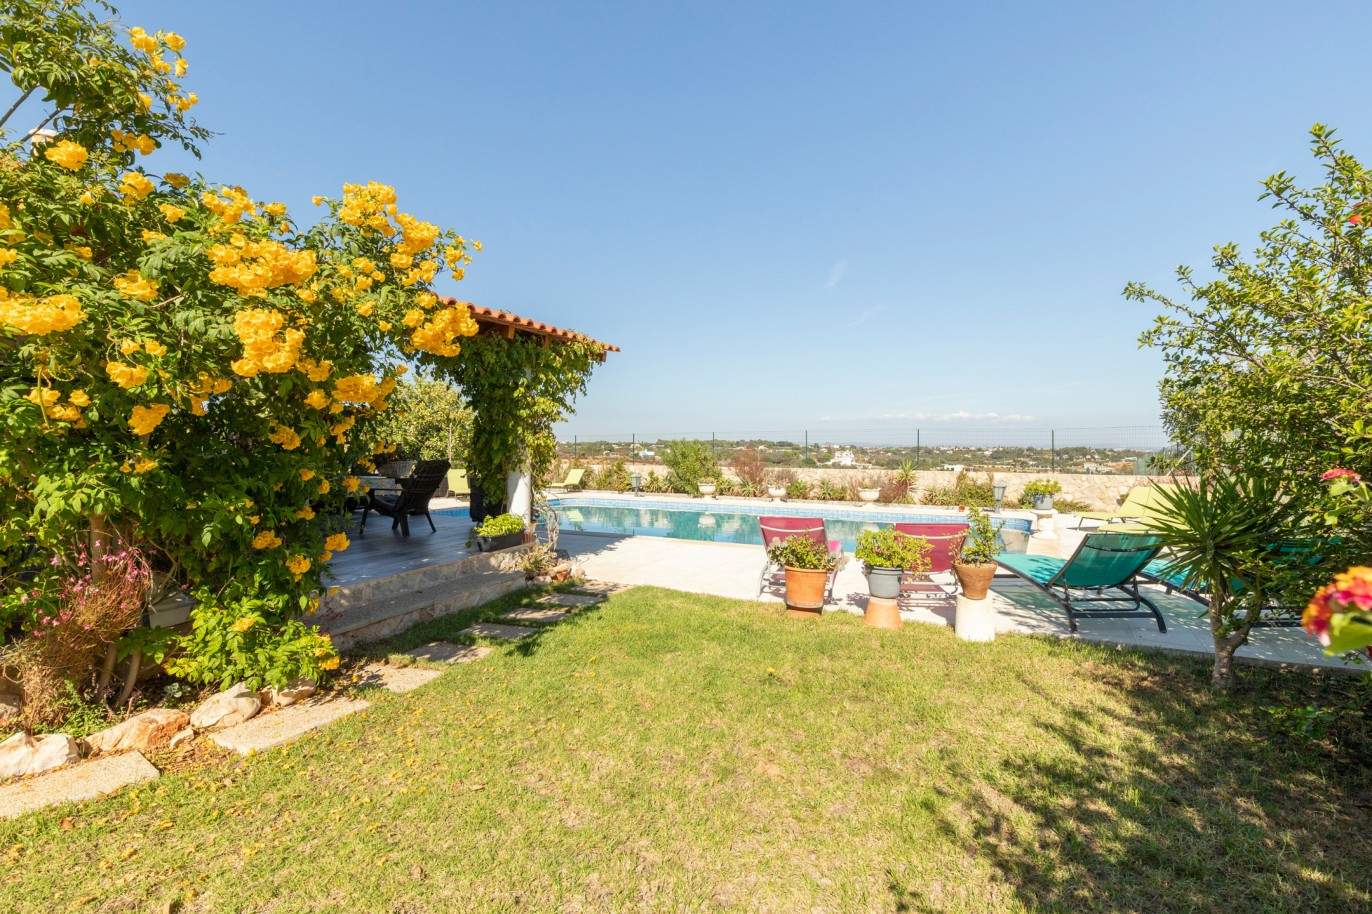 6 Bedrooms detached villa with swimming pool, for sale in Caramujeira, Algarve_209989